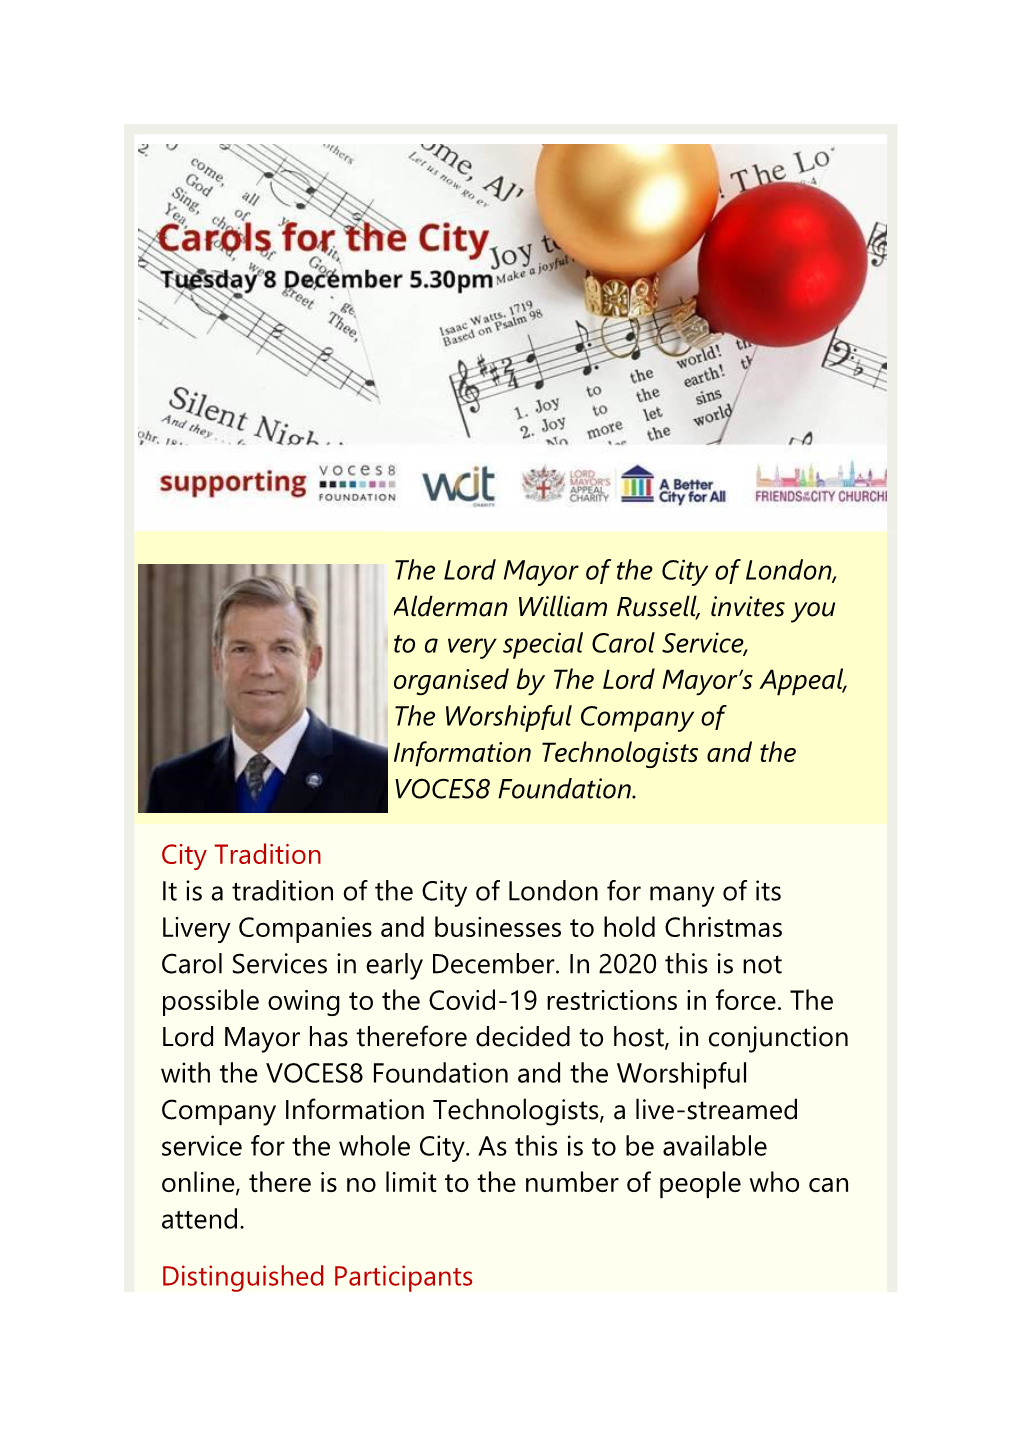 The Lord Mayor of the City of London, Alderman William Russell, Invites You to a Very Special Carol Service, Organised by the Lo